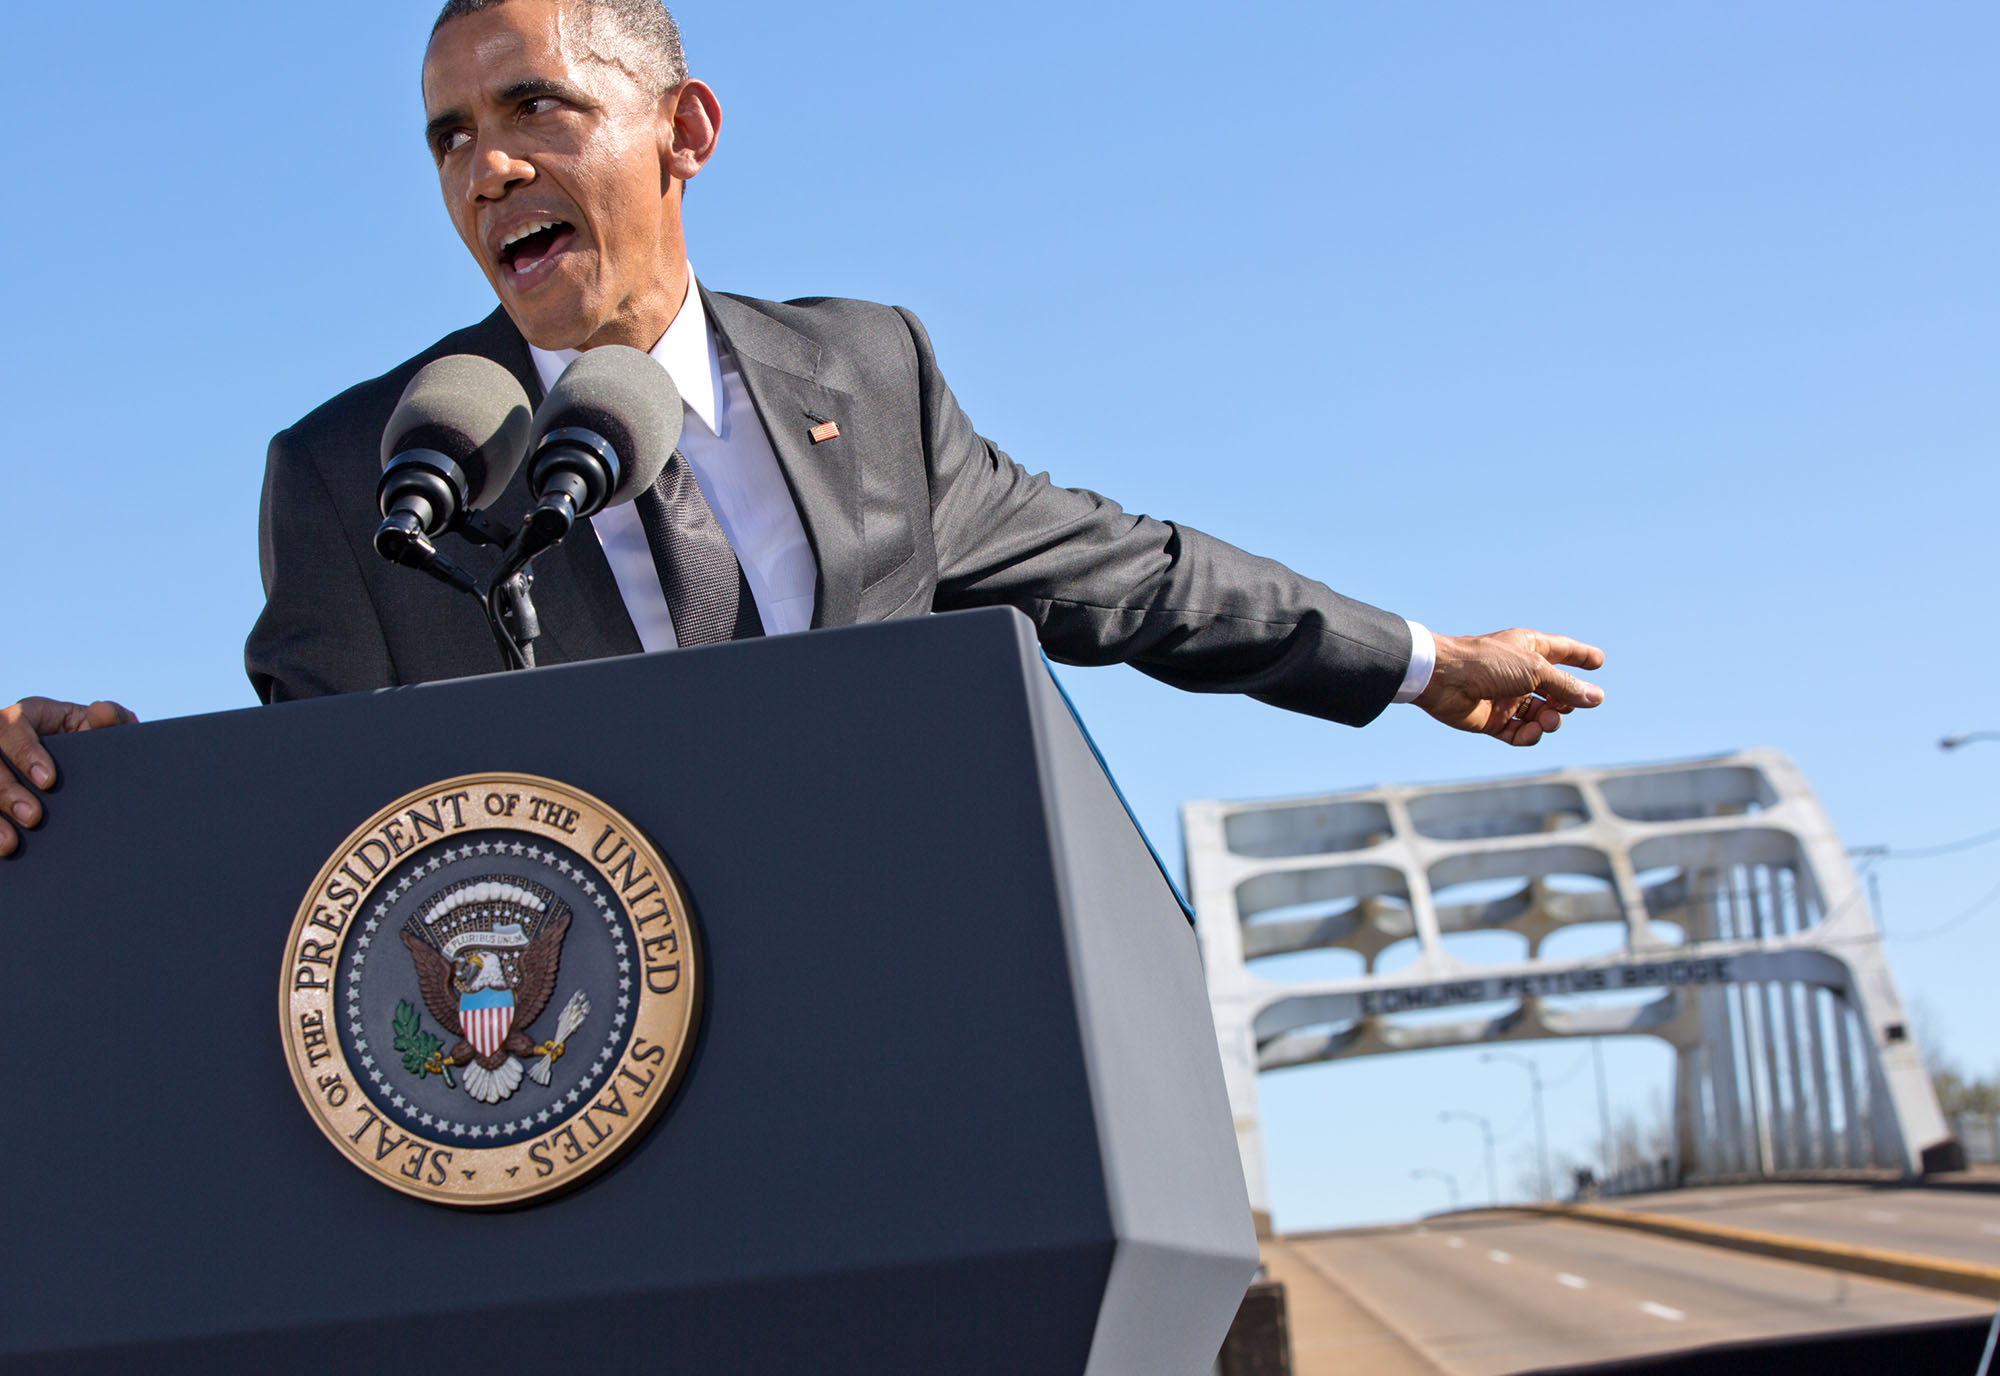 The President points towards the bridge during his speech. (Official White House Photo by Pete Souza)